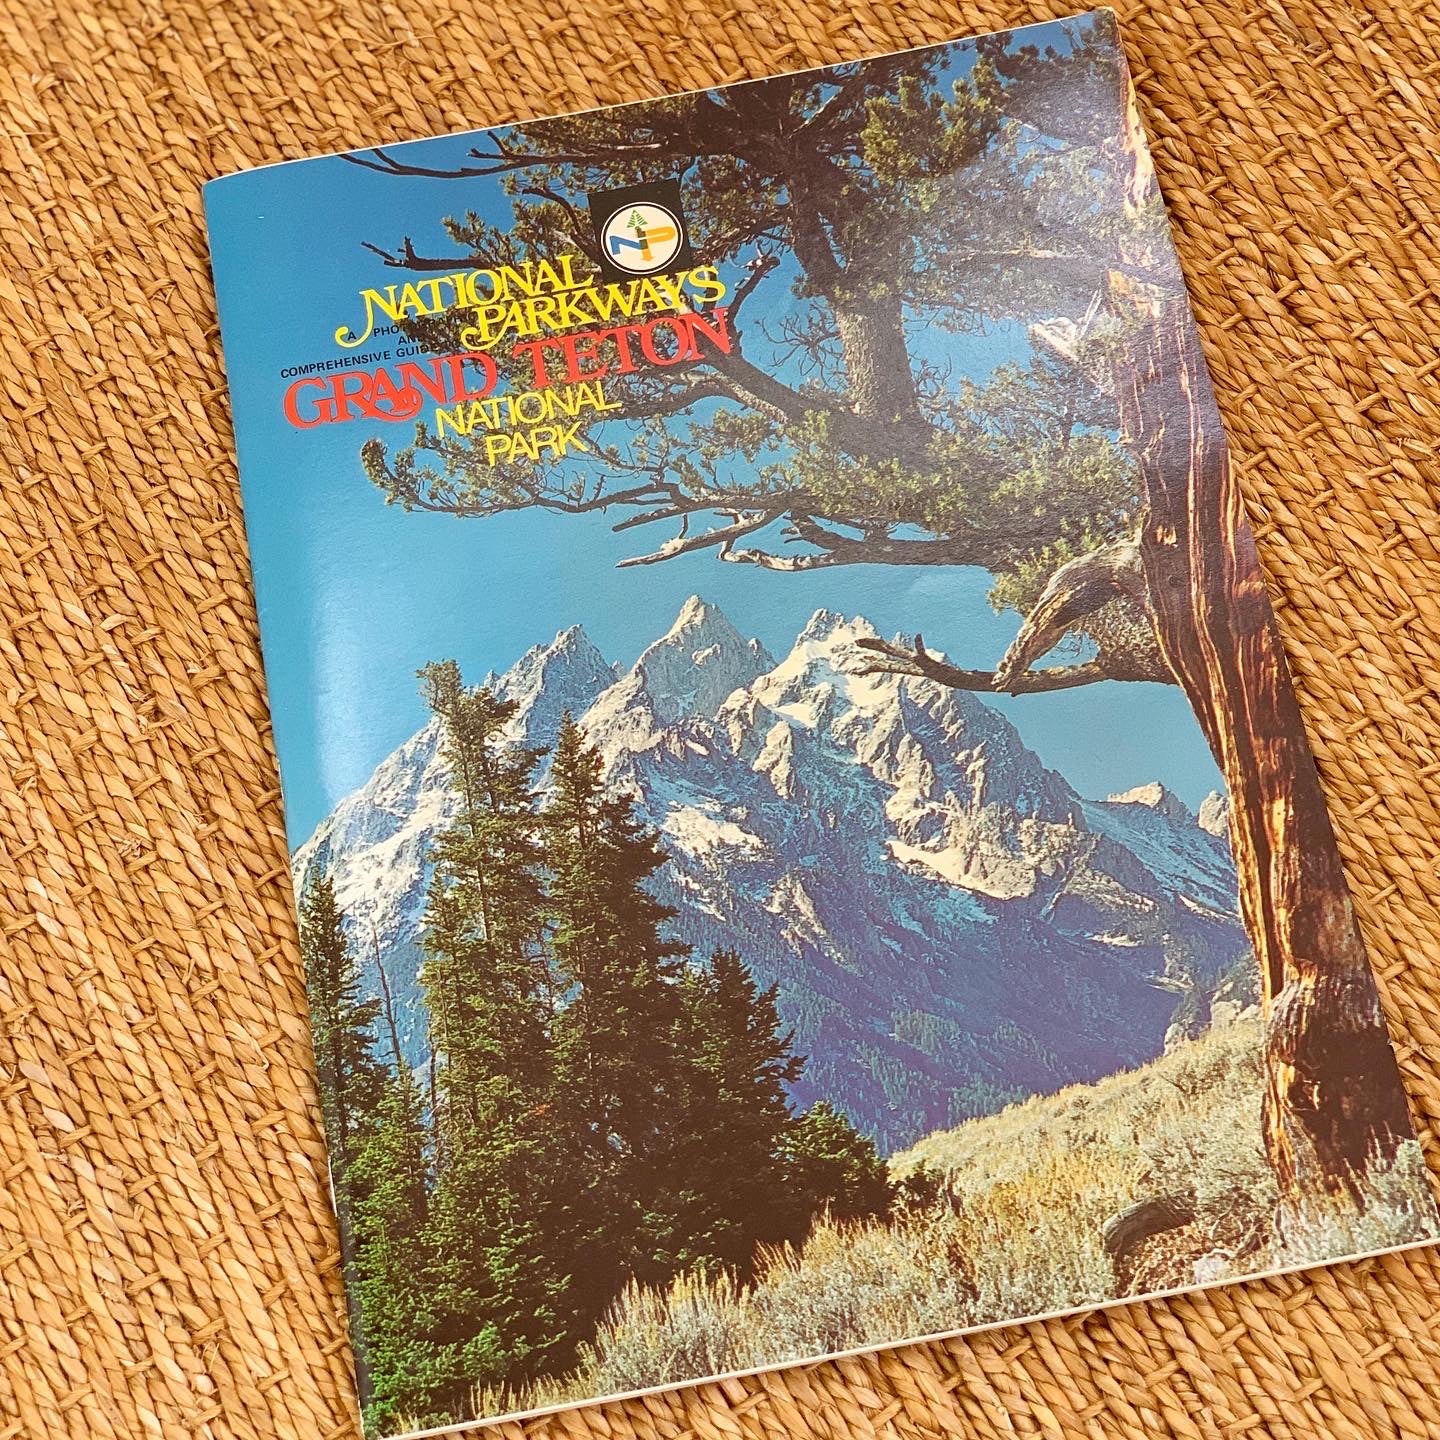 Grand Teton National Park by National Parkways (1971)